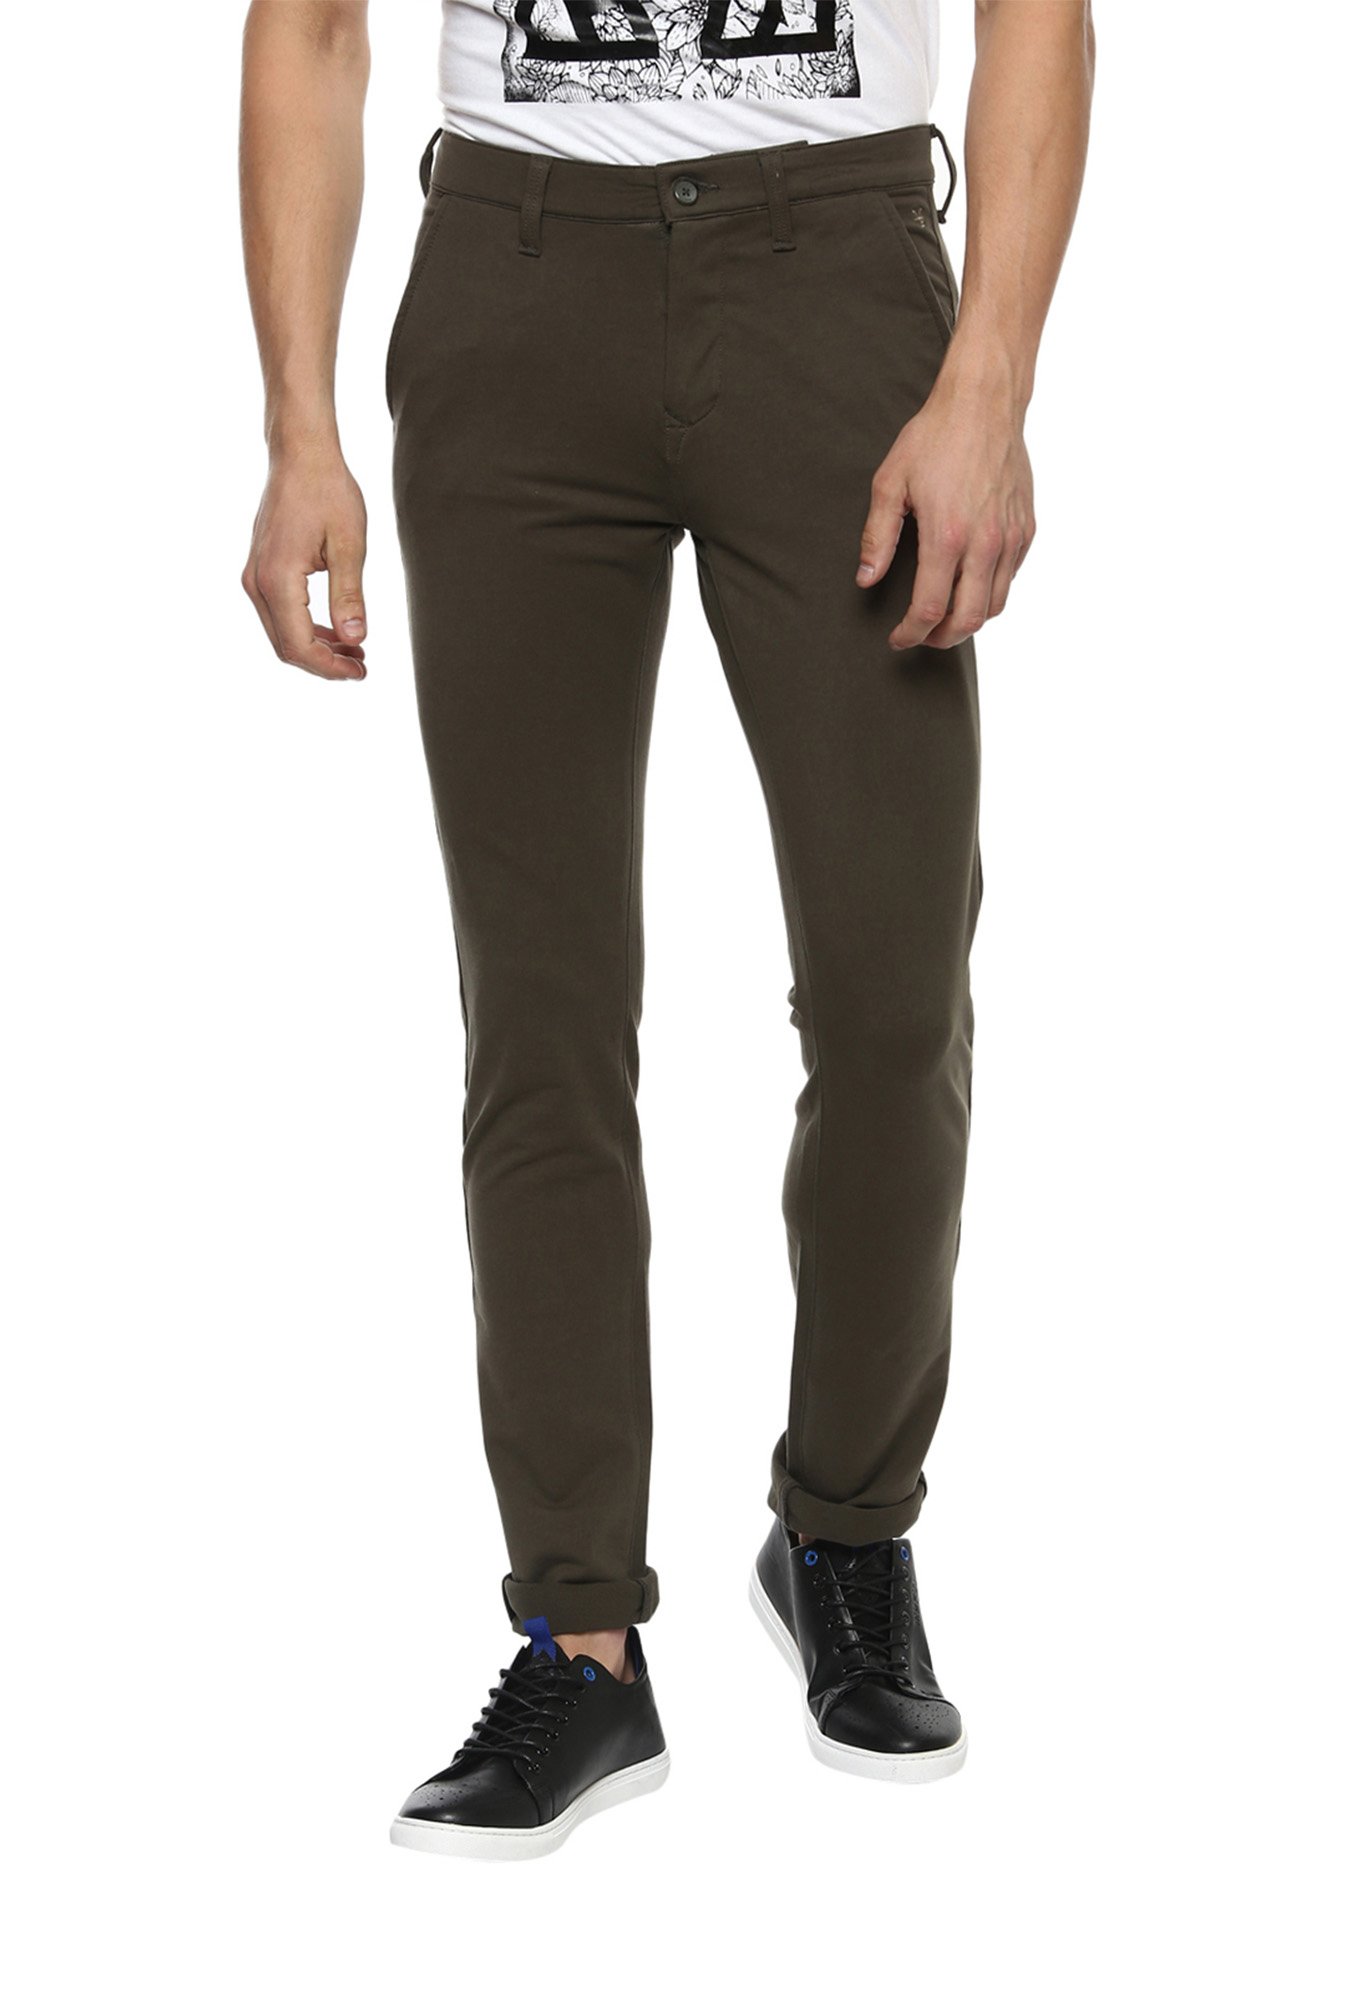 Buy Charcoal Grey Trousers & Pants for Men by MUFTI Online | Ajio.com